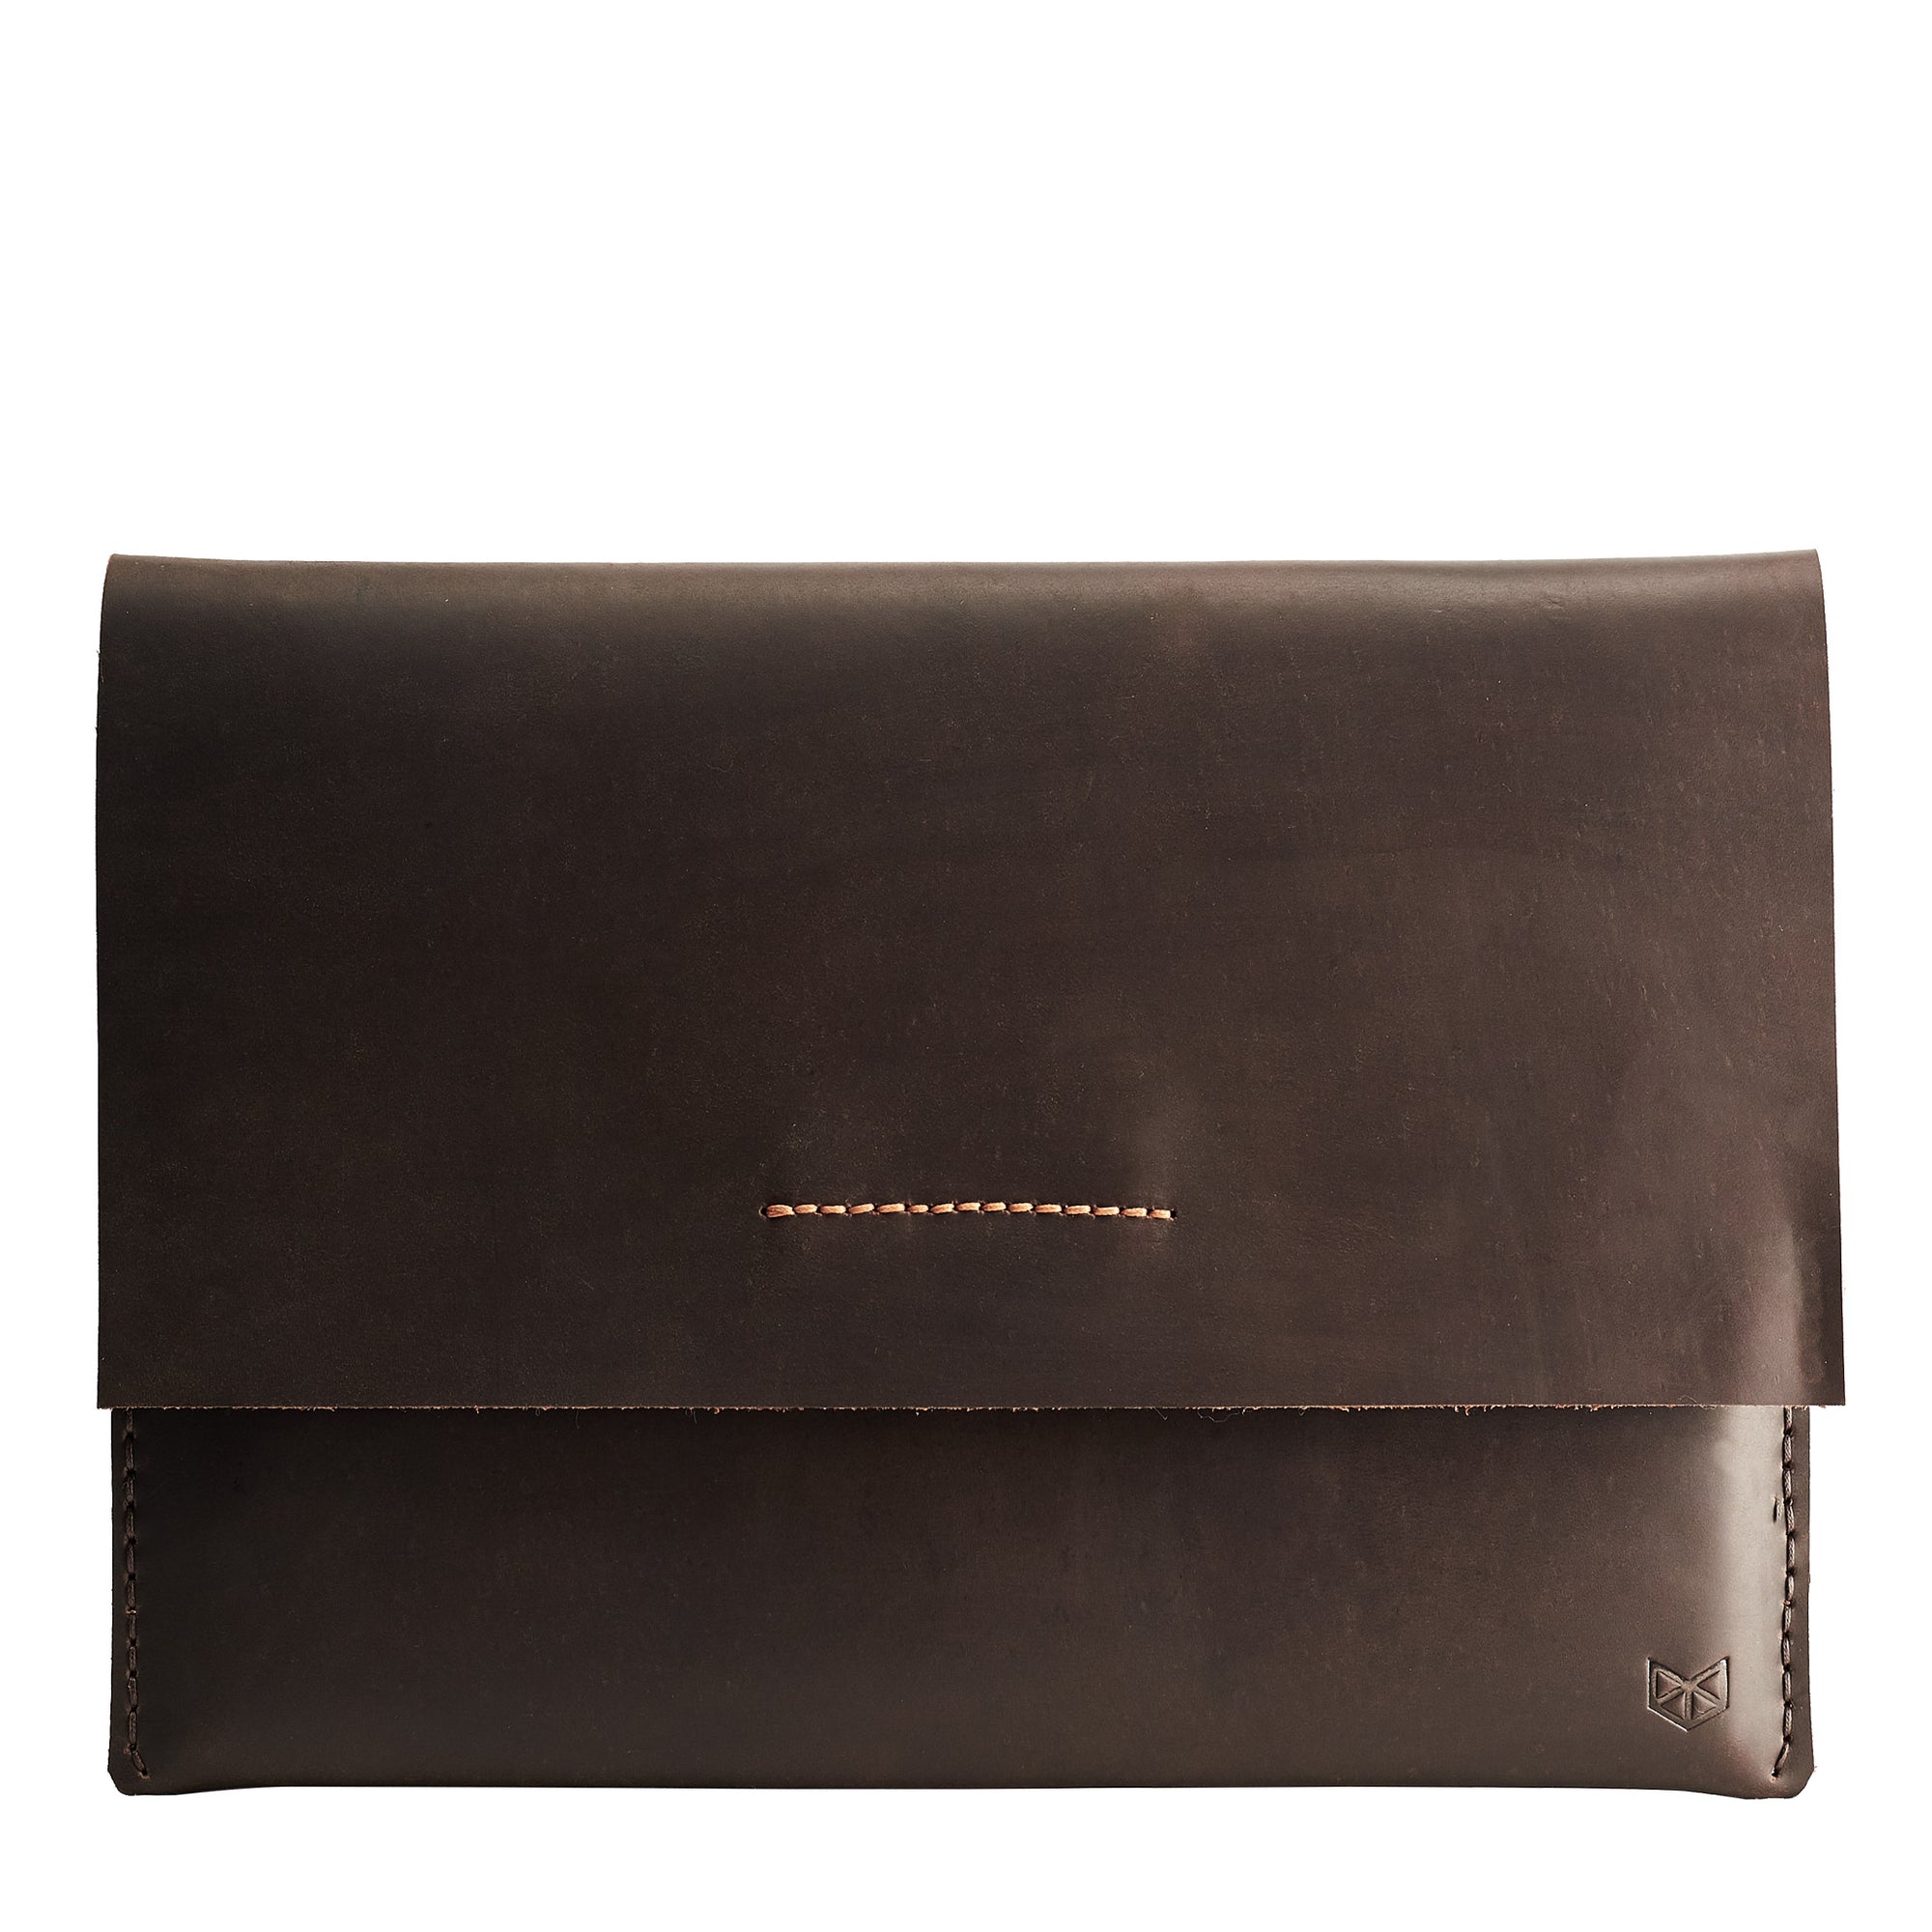 Cover. Leather ASUS Zenbook Pro Duo Sleeve brown Case by Capra Leather